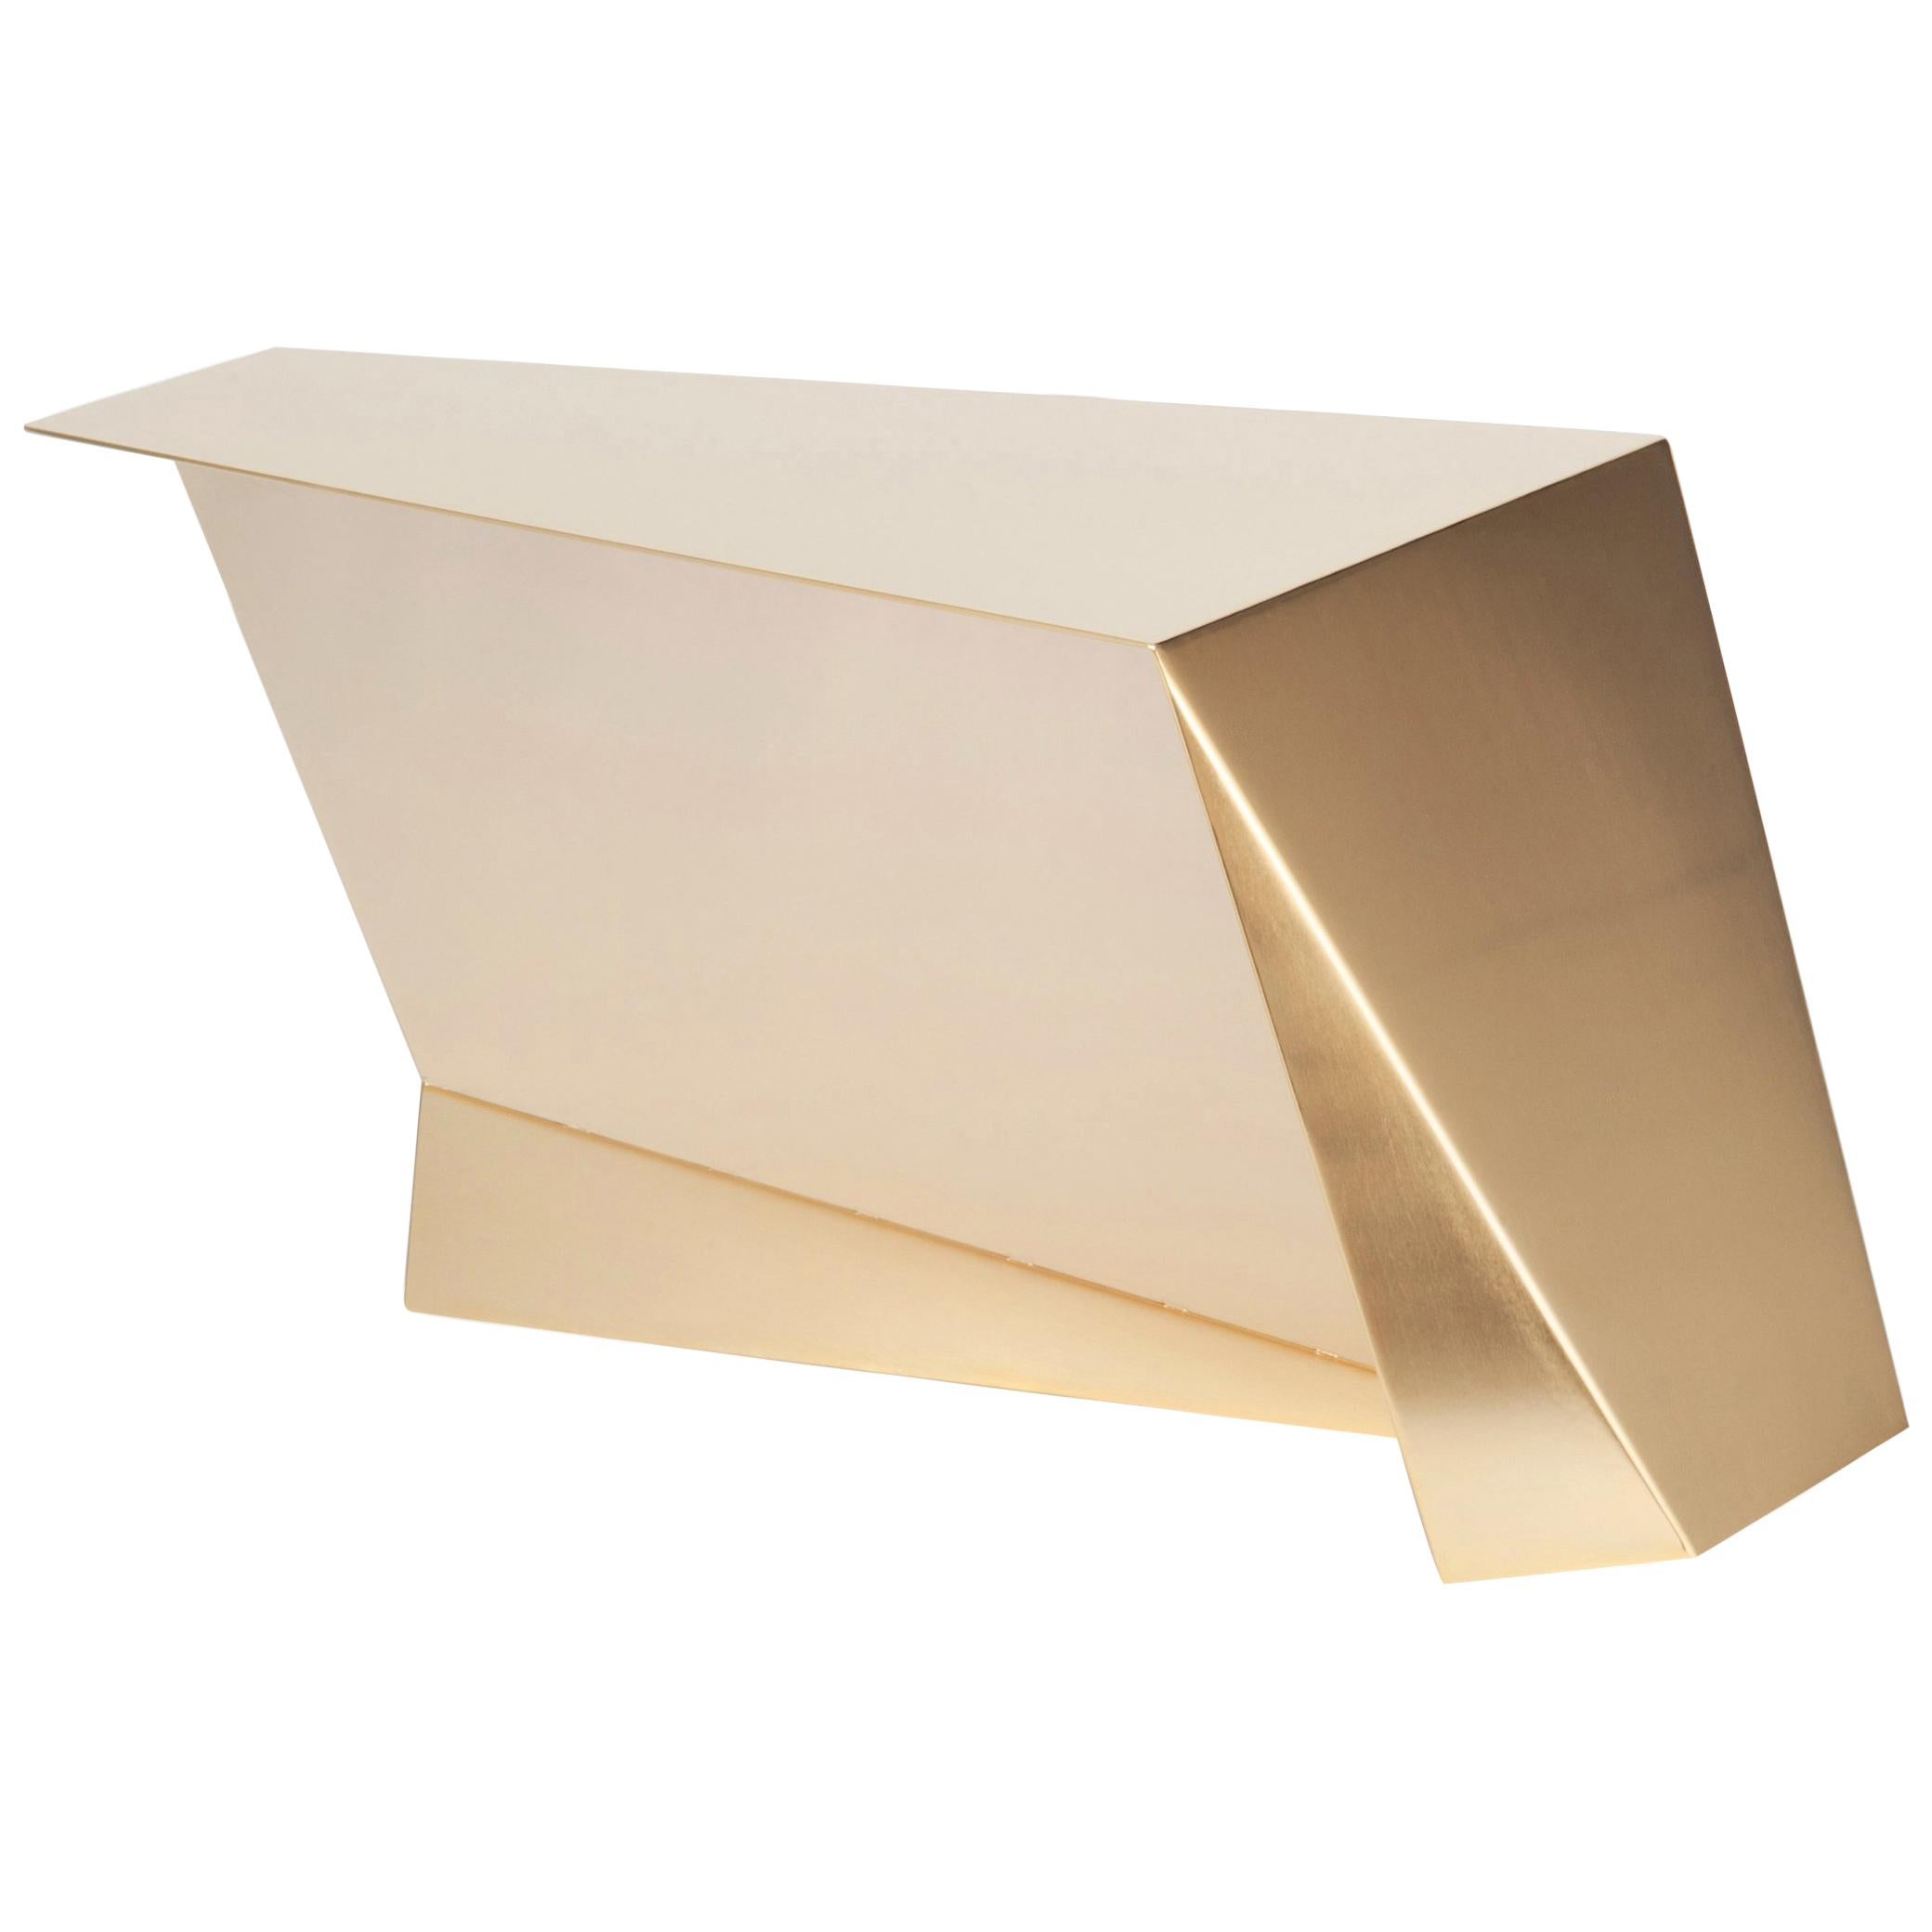 Pegasus, Contemporary Coffee Table, Golden Stainless Steel